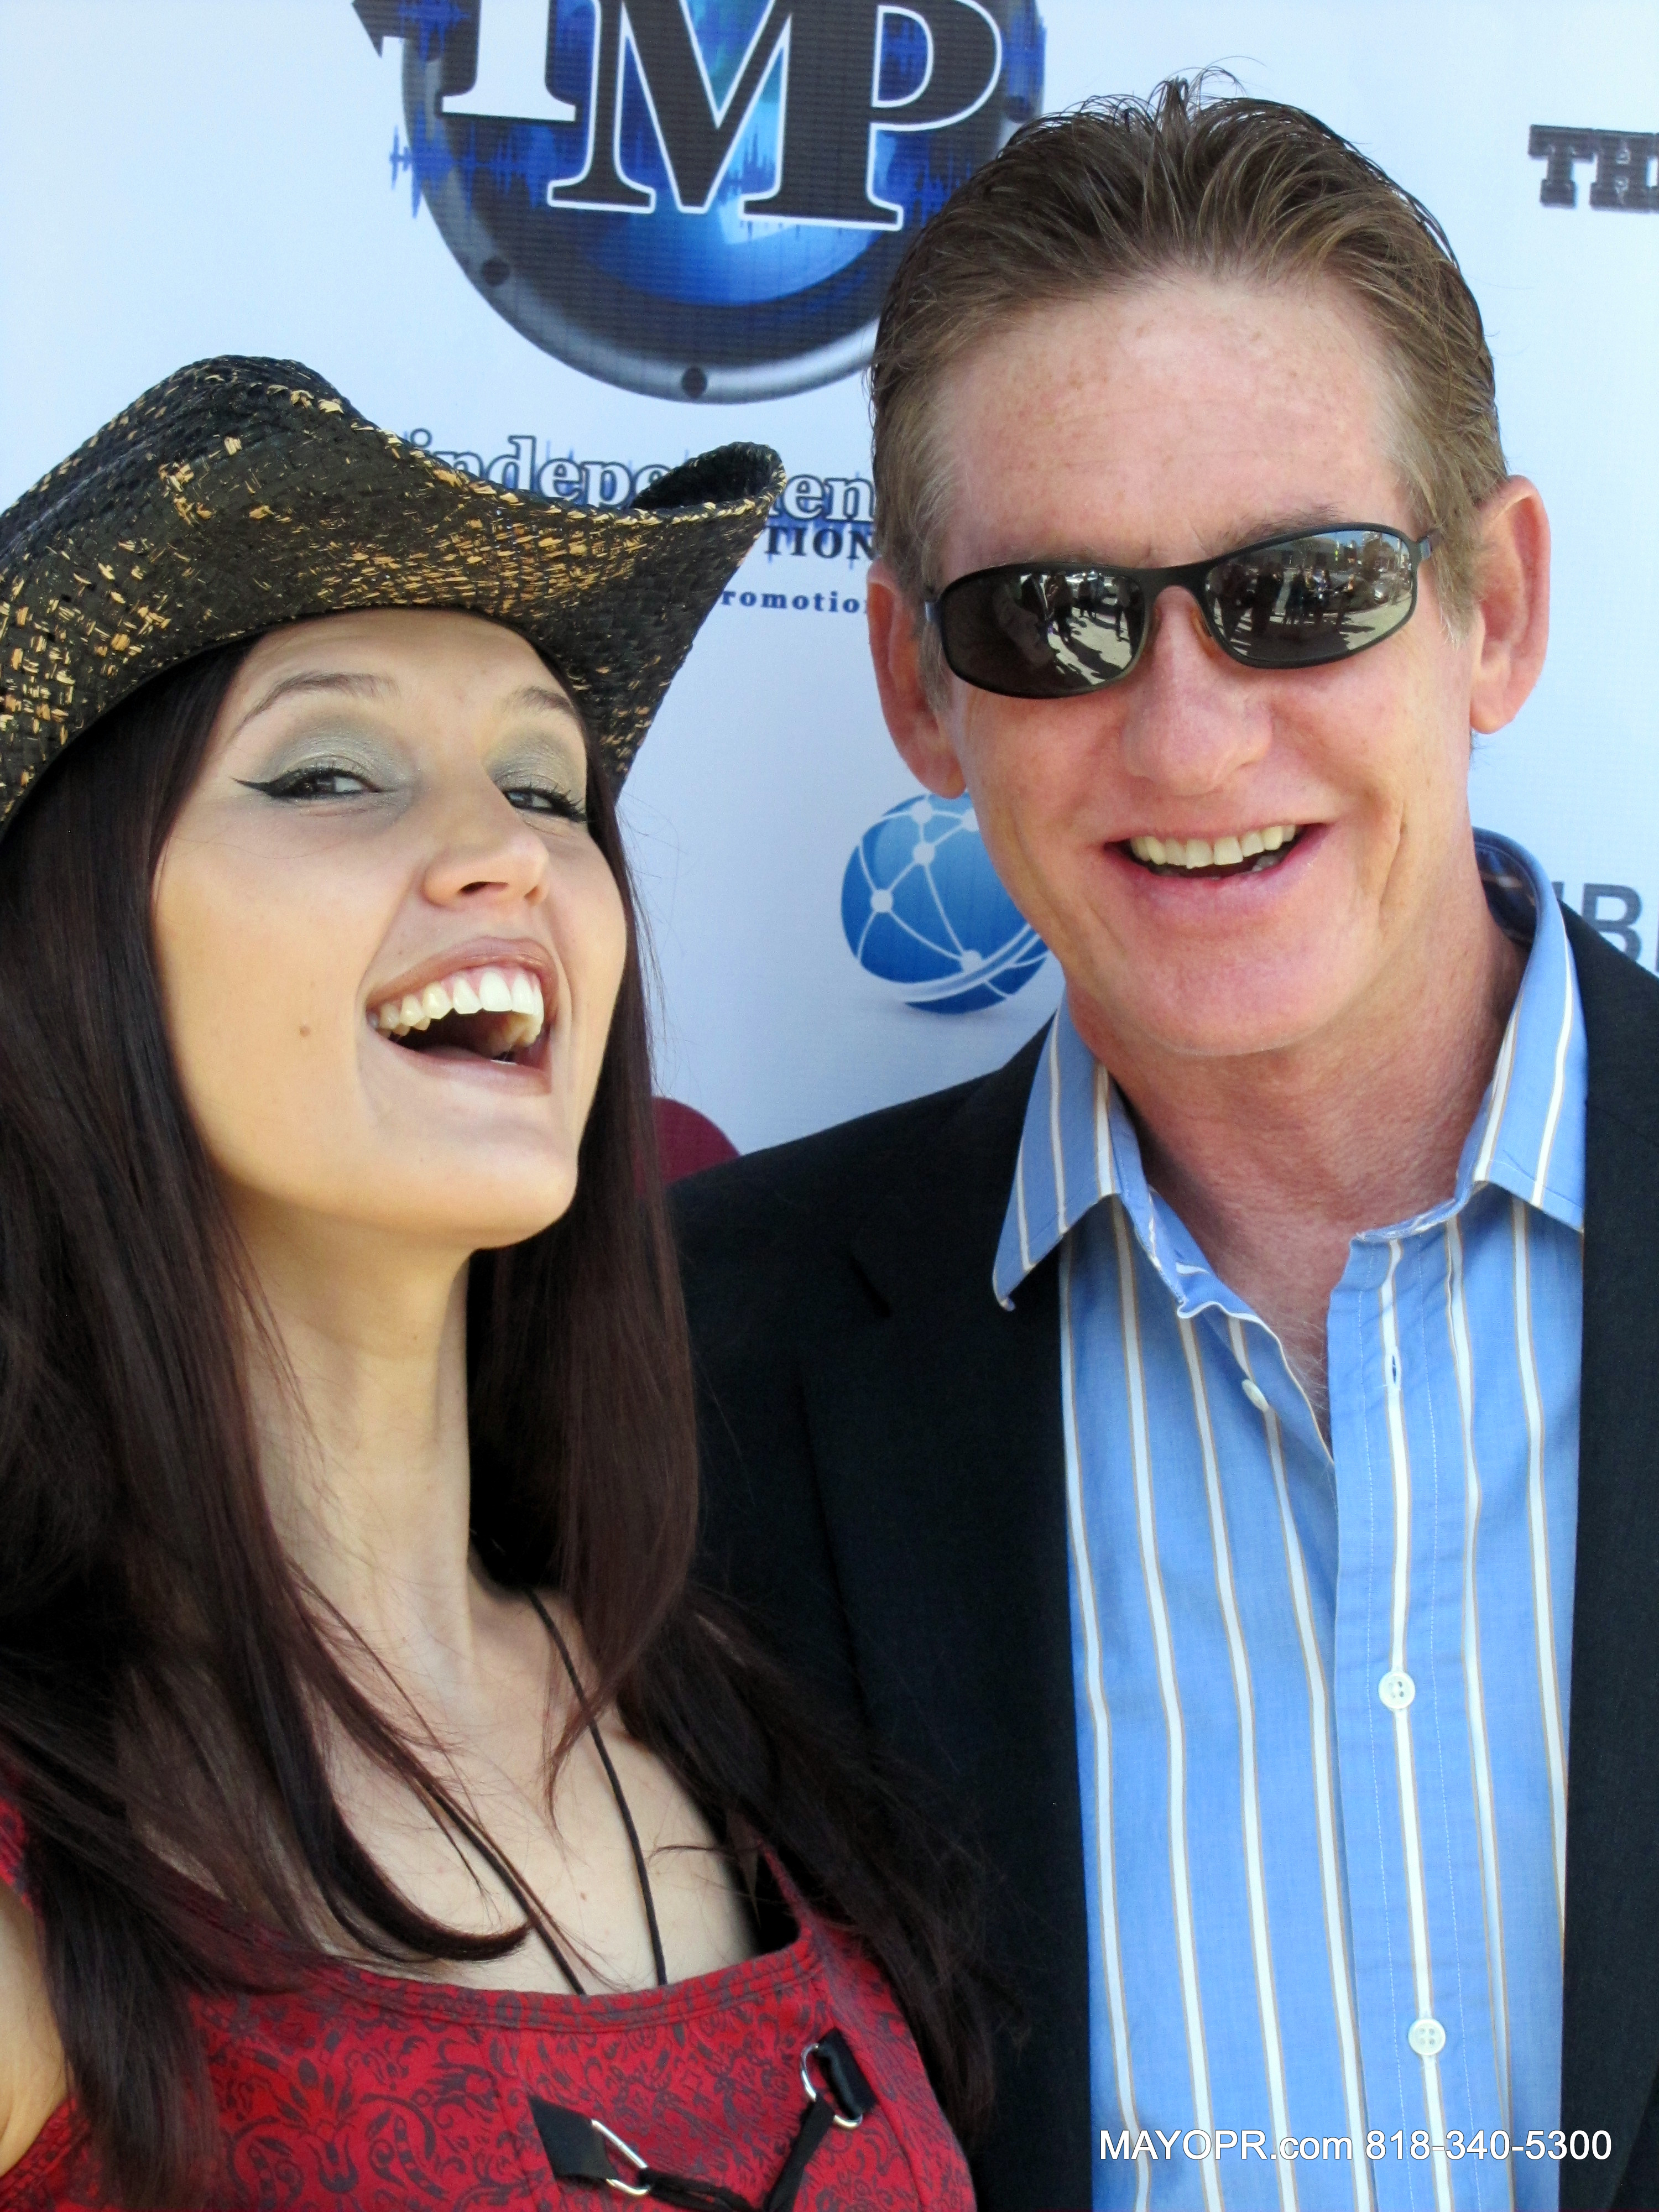 Country Music Star Glitter Rose with Jazz Musician Tom Slack The 2014 Artists In Music Awards nominees.